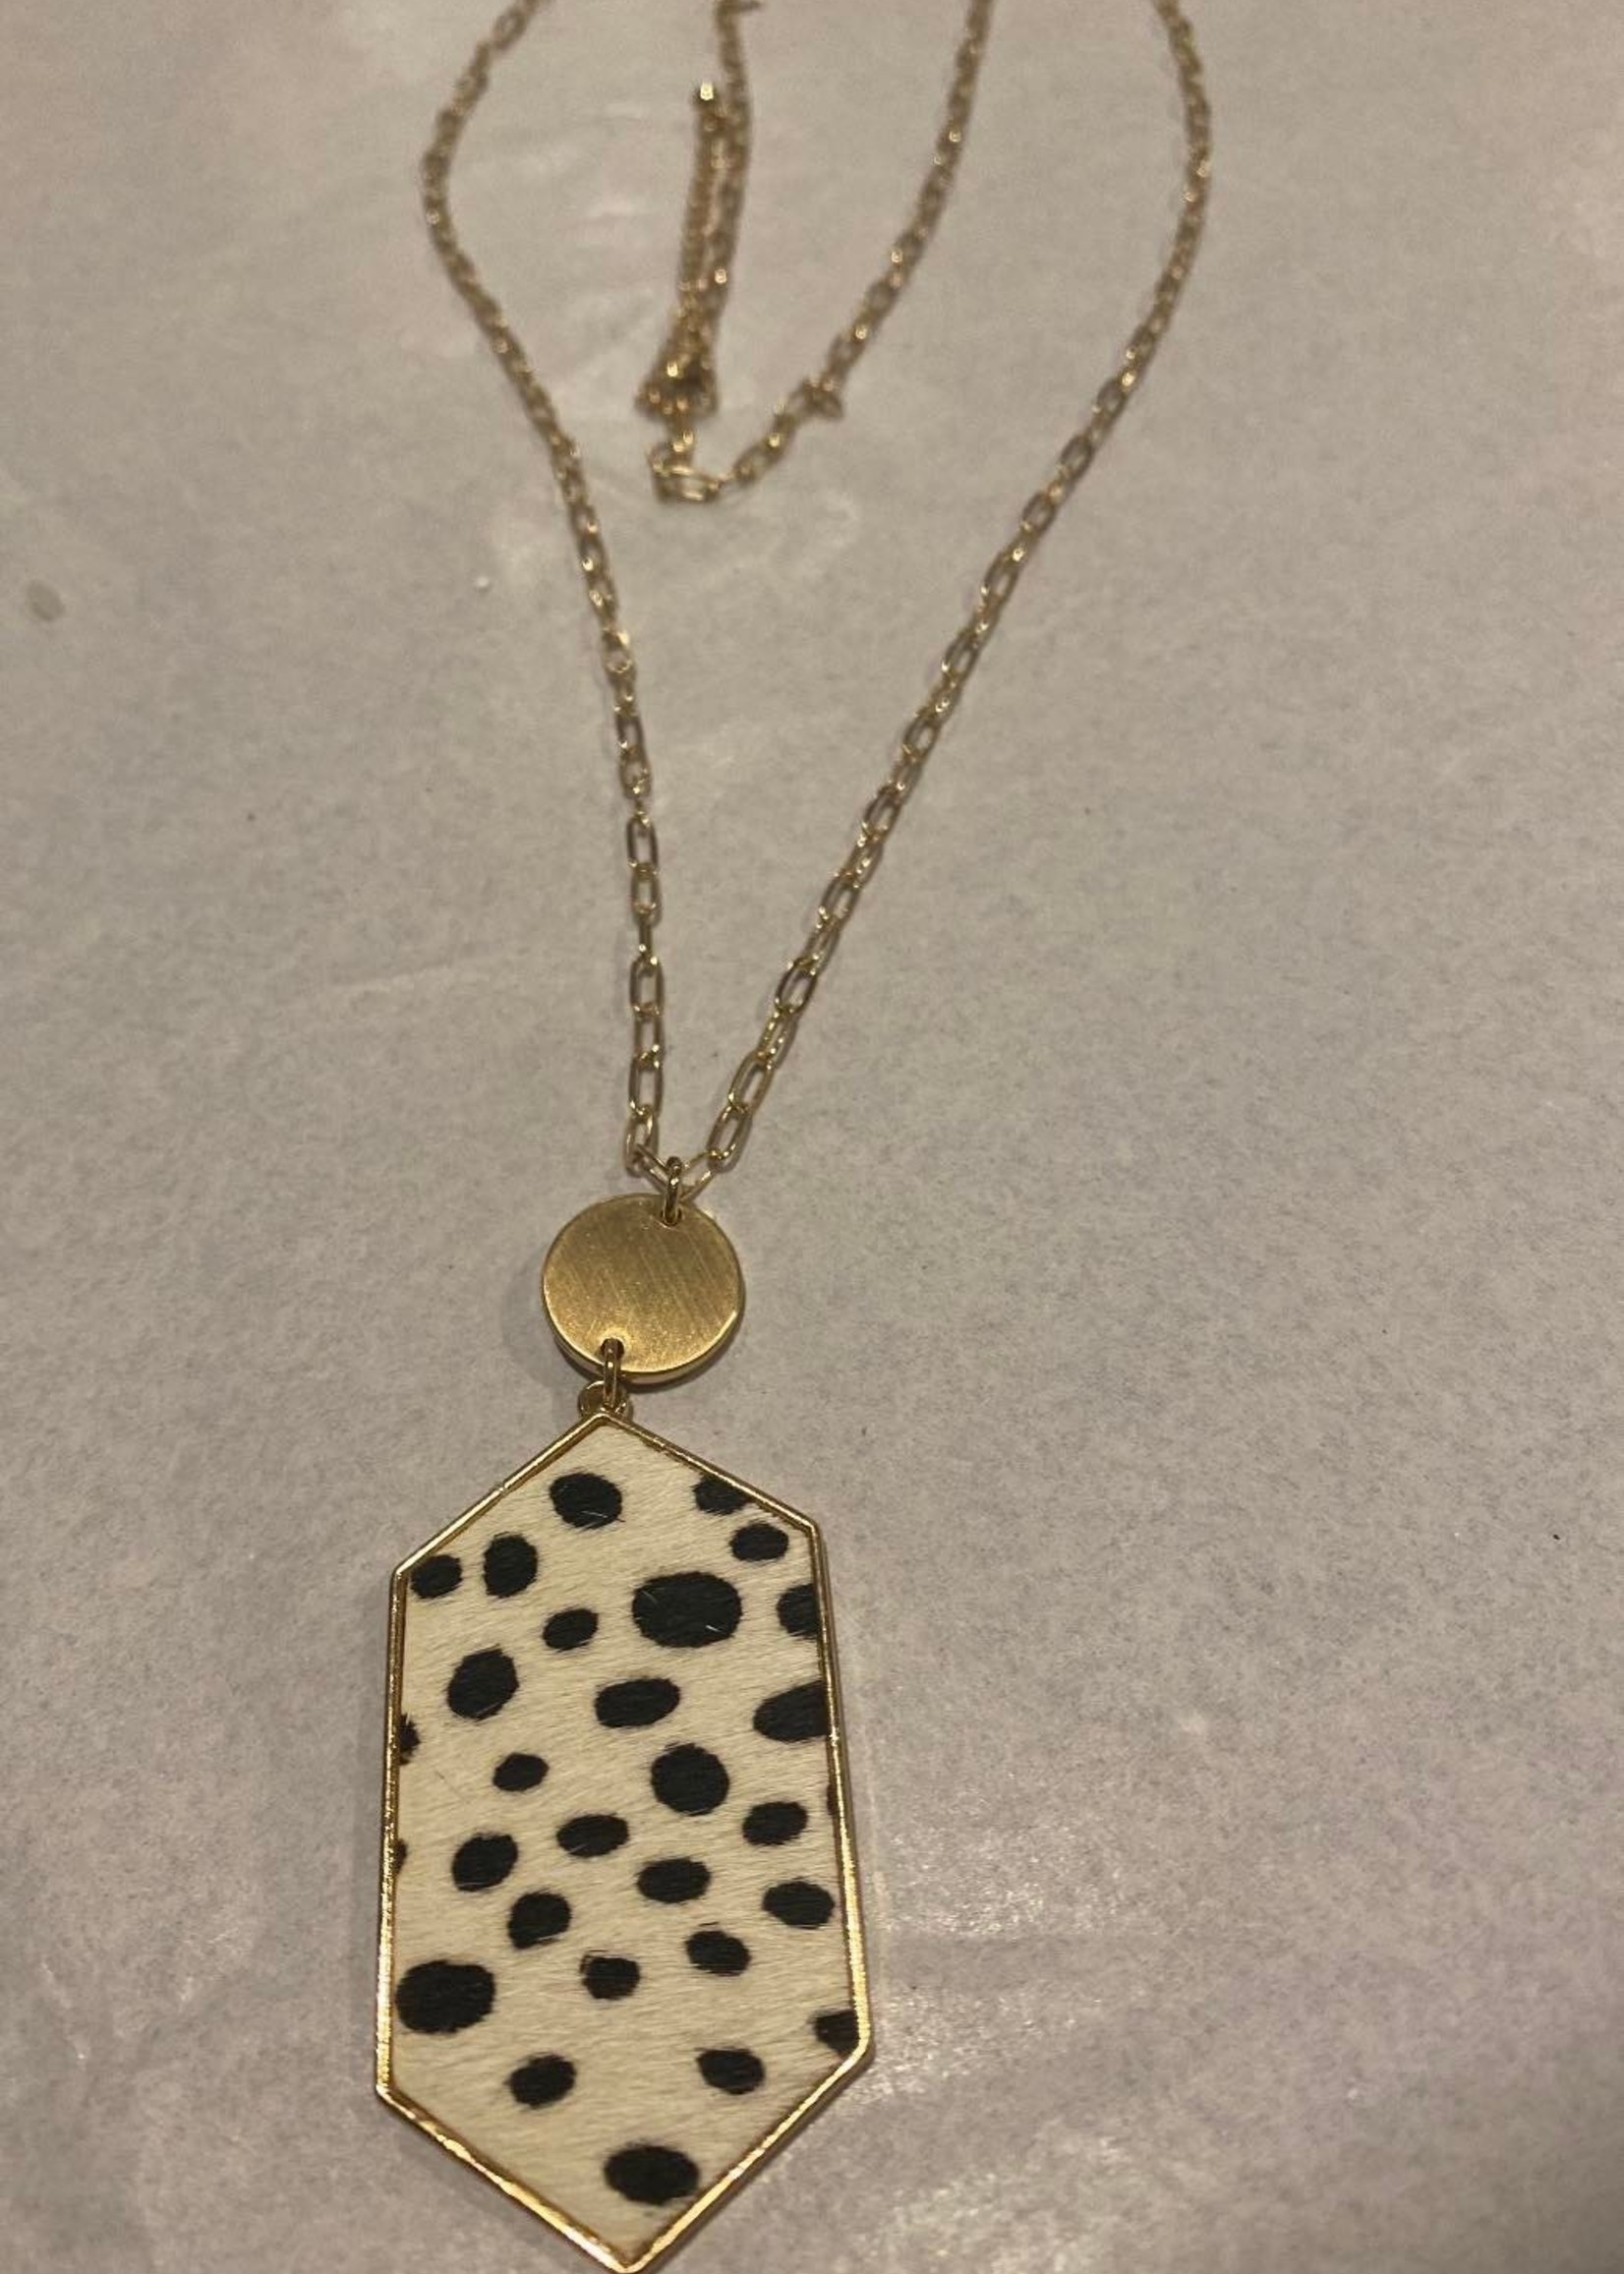 What's Hot White cheetah print hexagon and gold necklace 32"